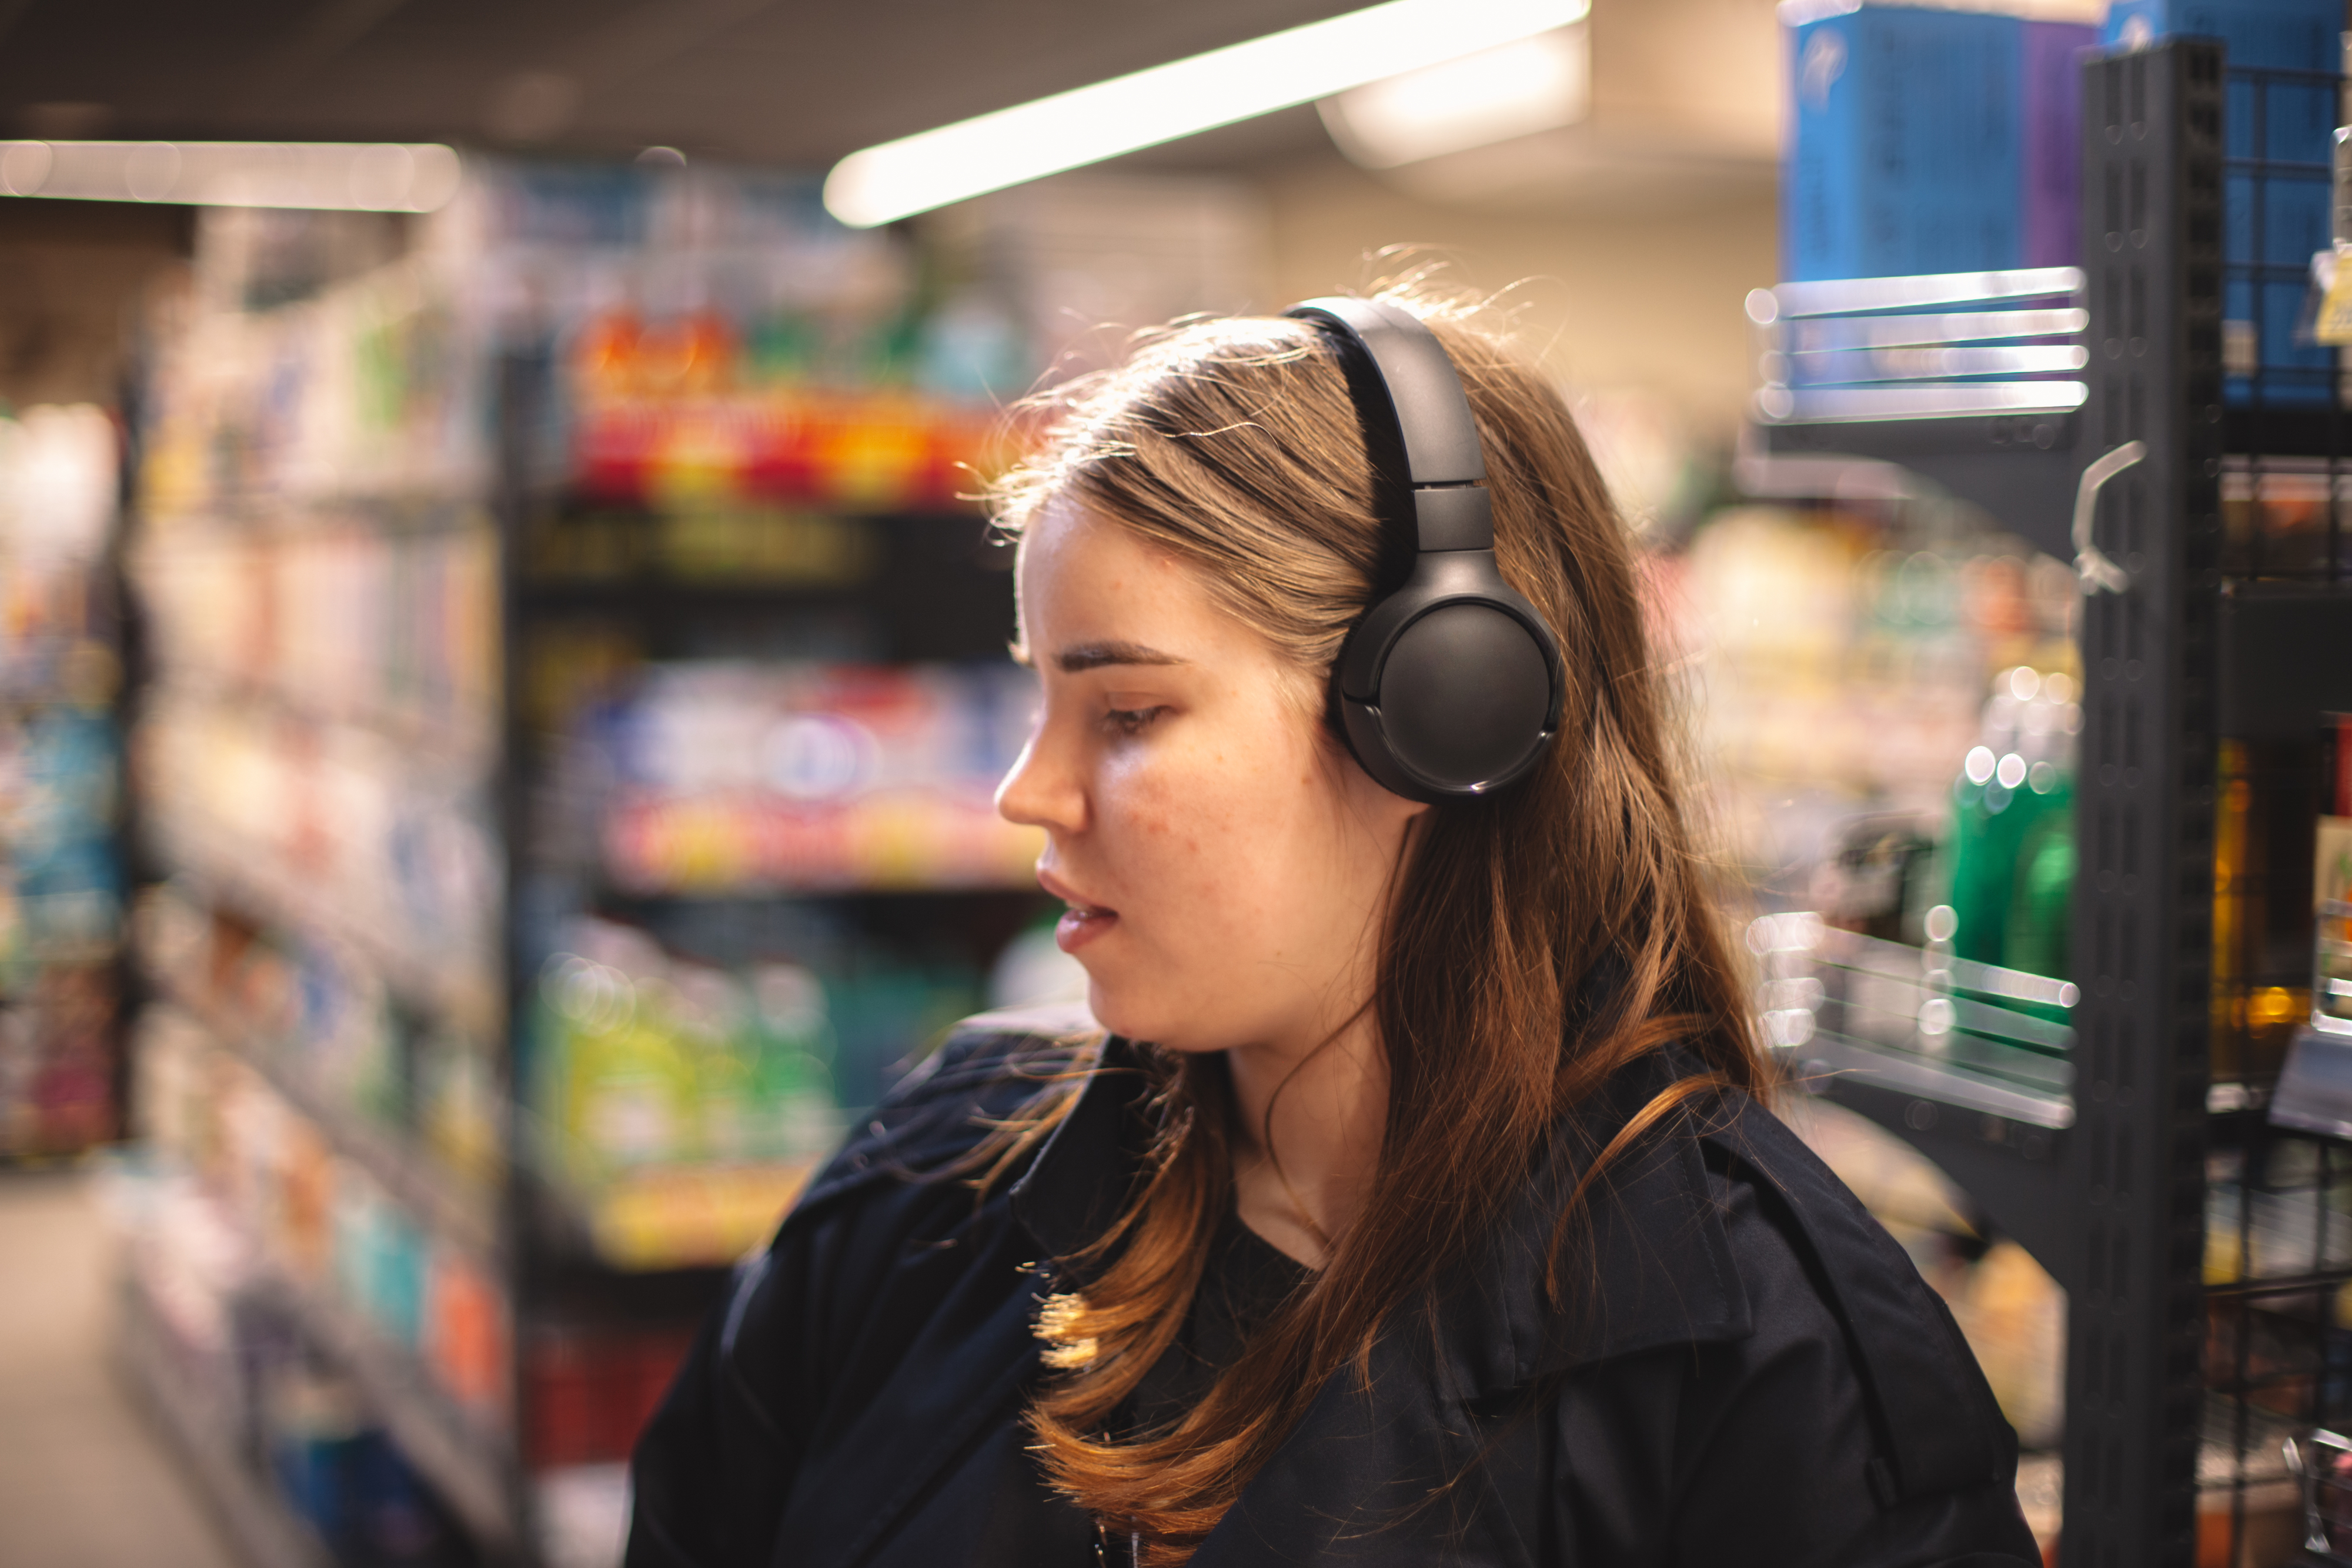 Woman with headphones shopping in a grocery store aisle